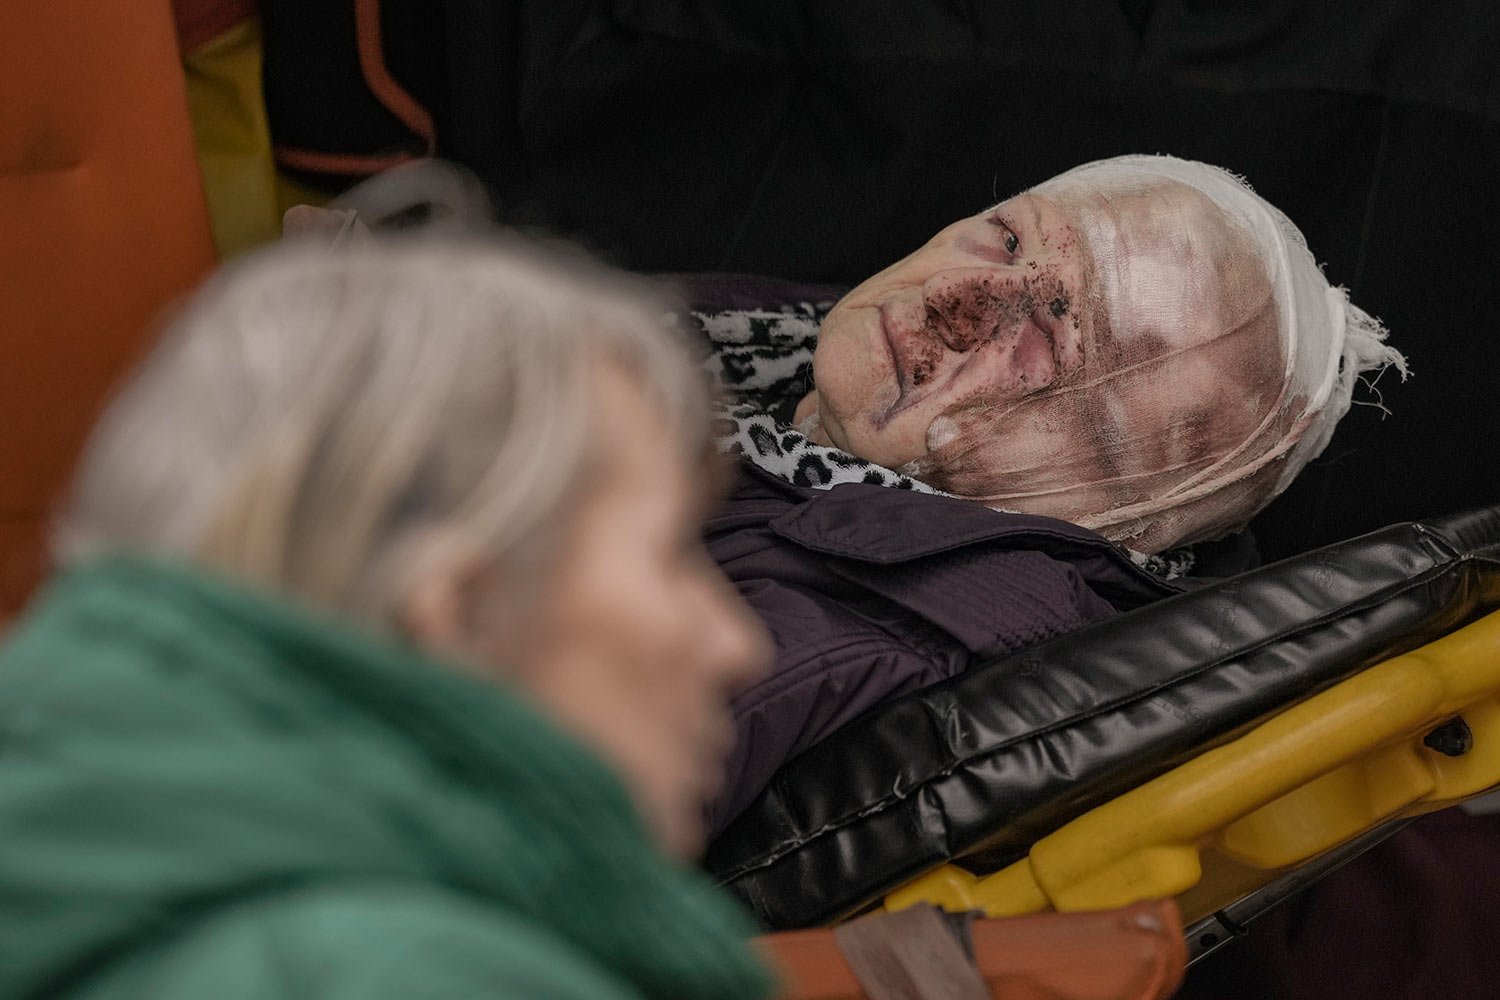  An injured woman evacuated from Irpin lies on a stretcher in an ambulance on the outskirts of Kyiv, Ukraine, Saturday, March 26, 2022. (AP Photo/Vadim Ghirda) 